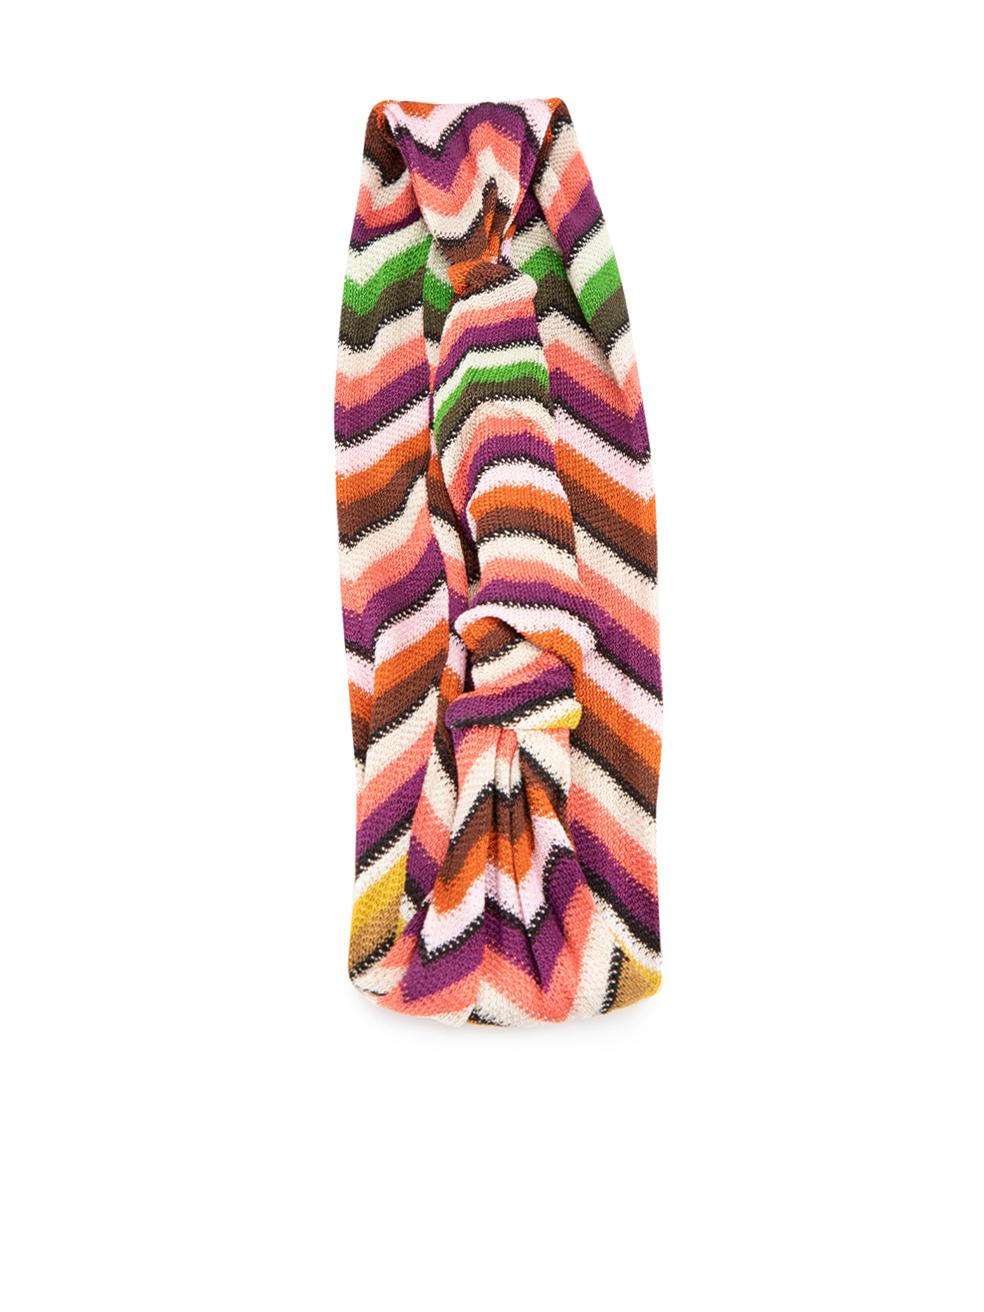 CONDITION is Never Worn. No visible wear to headband is evident on this used Missoni designer resale item. 



Details


Multicolour

Synthetic

Headband

Striped pattern

Elasticated





Made in Italy



Composition

NO COMPOSITION LABEL BUT FEELS